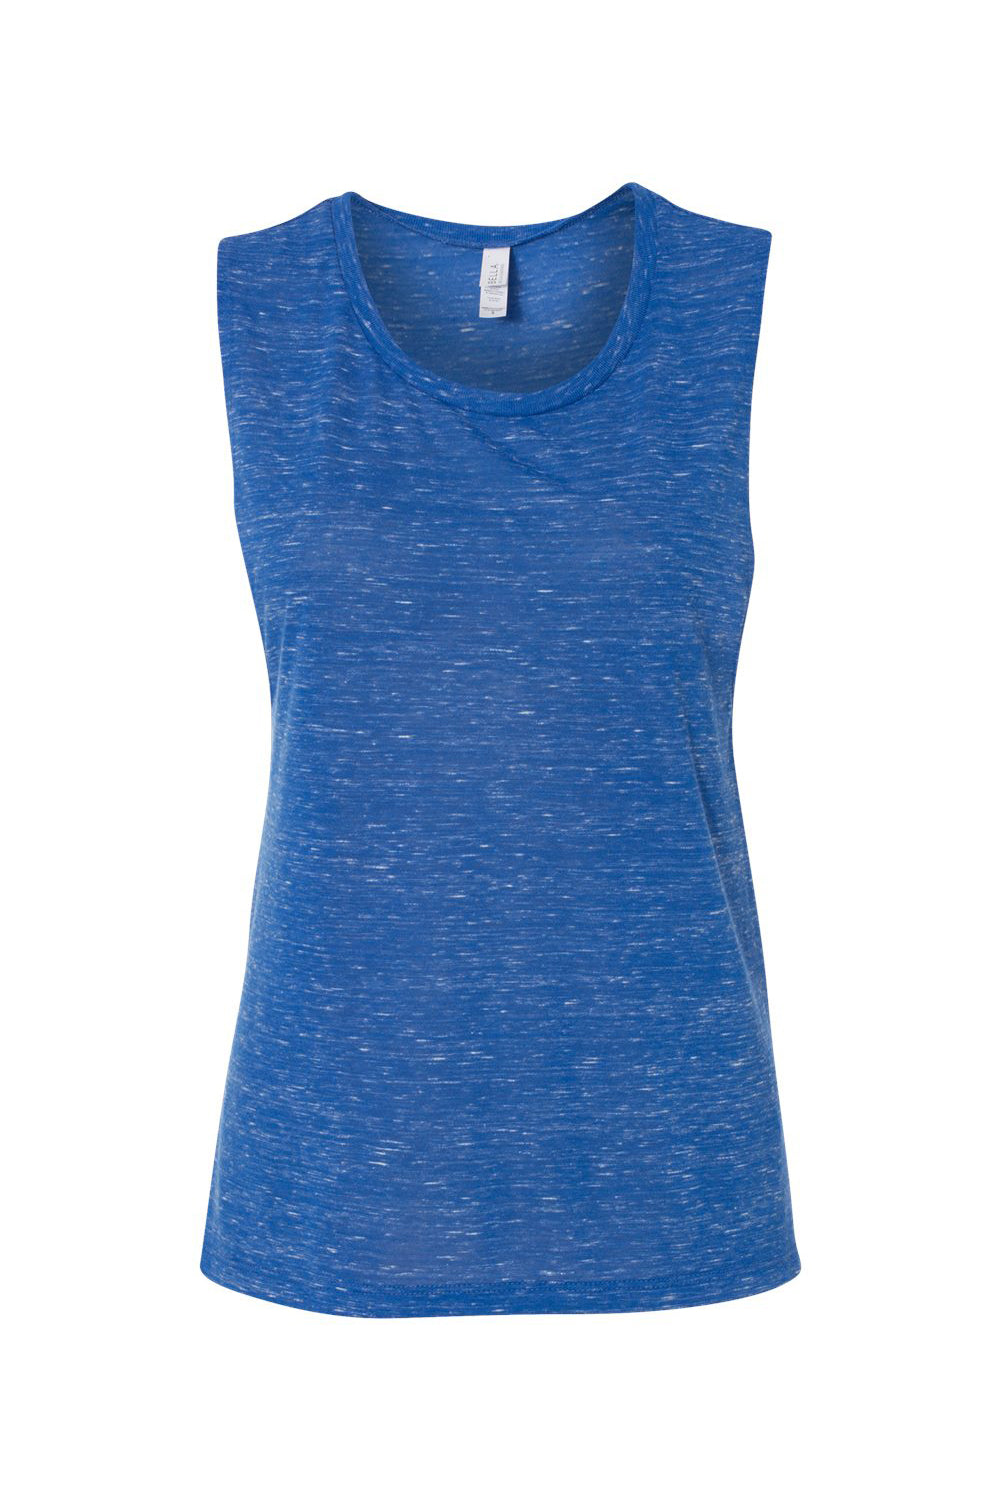 Bella + Canvas BC8803/B8803/8803 Womens Flowy Muscle Tank Top True Royal Blue Marble Flat Front